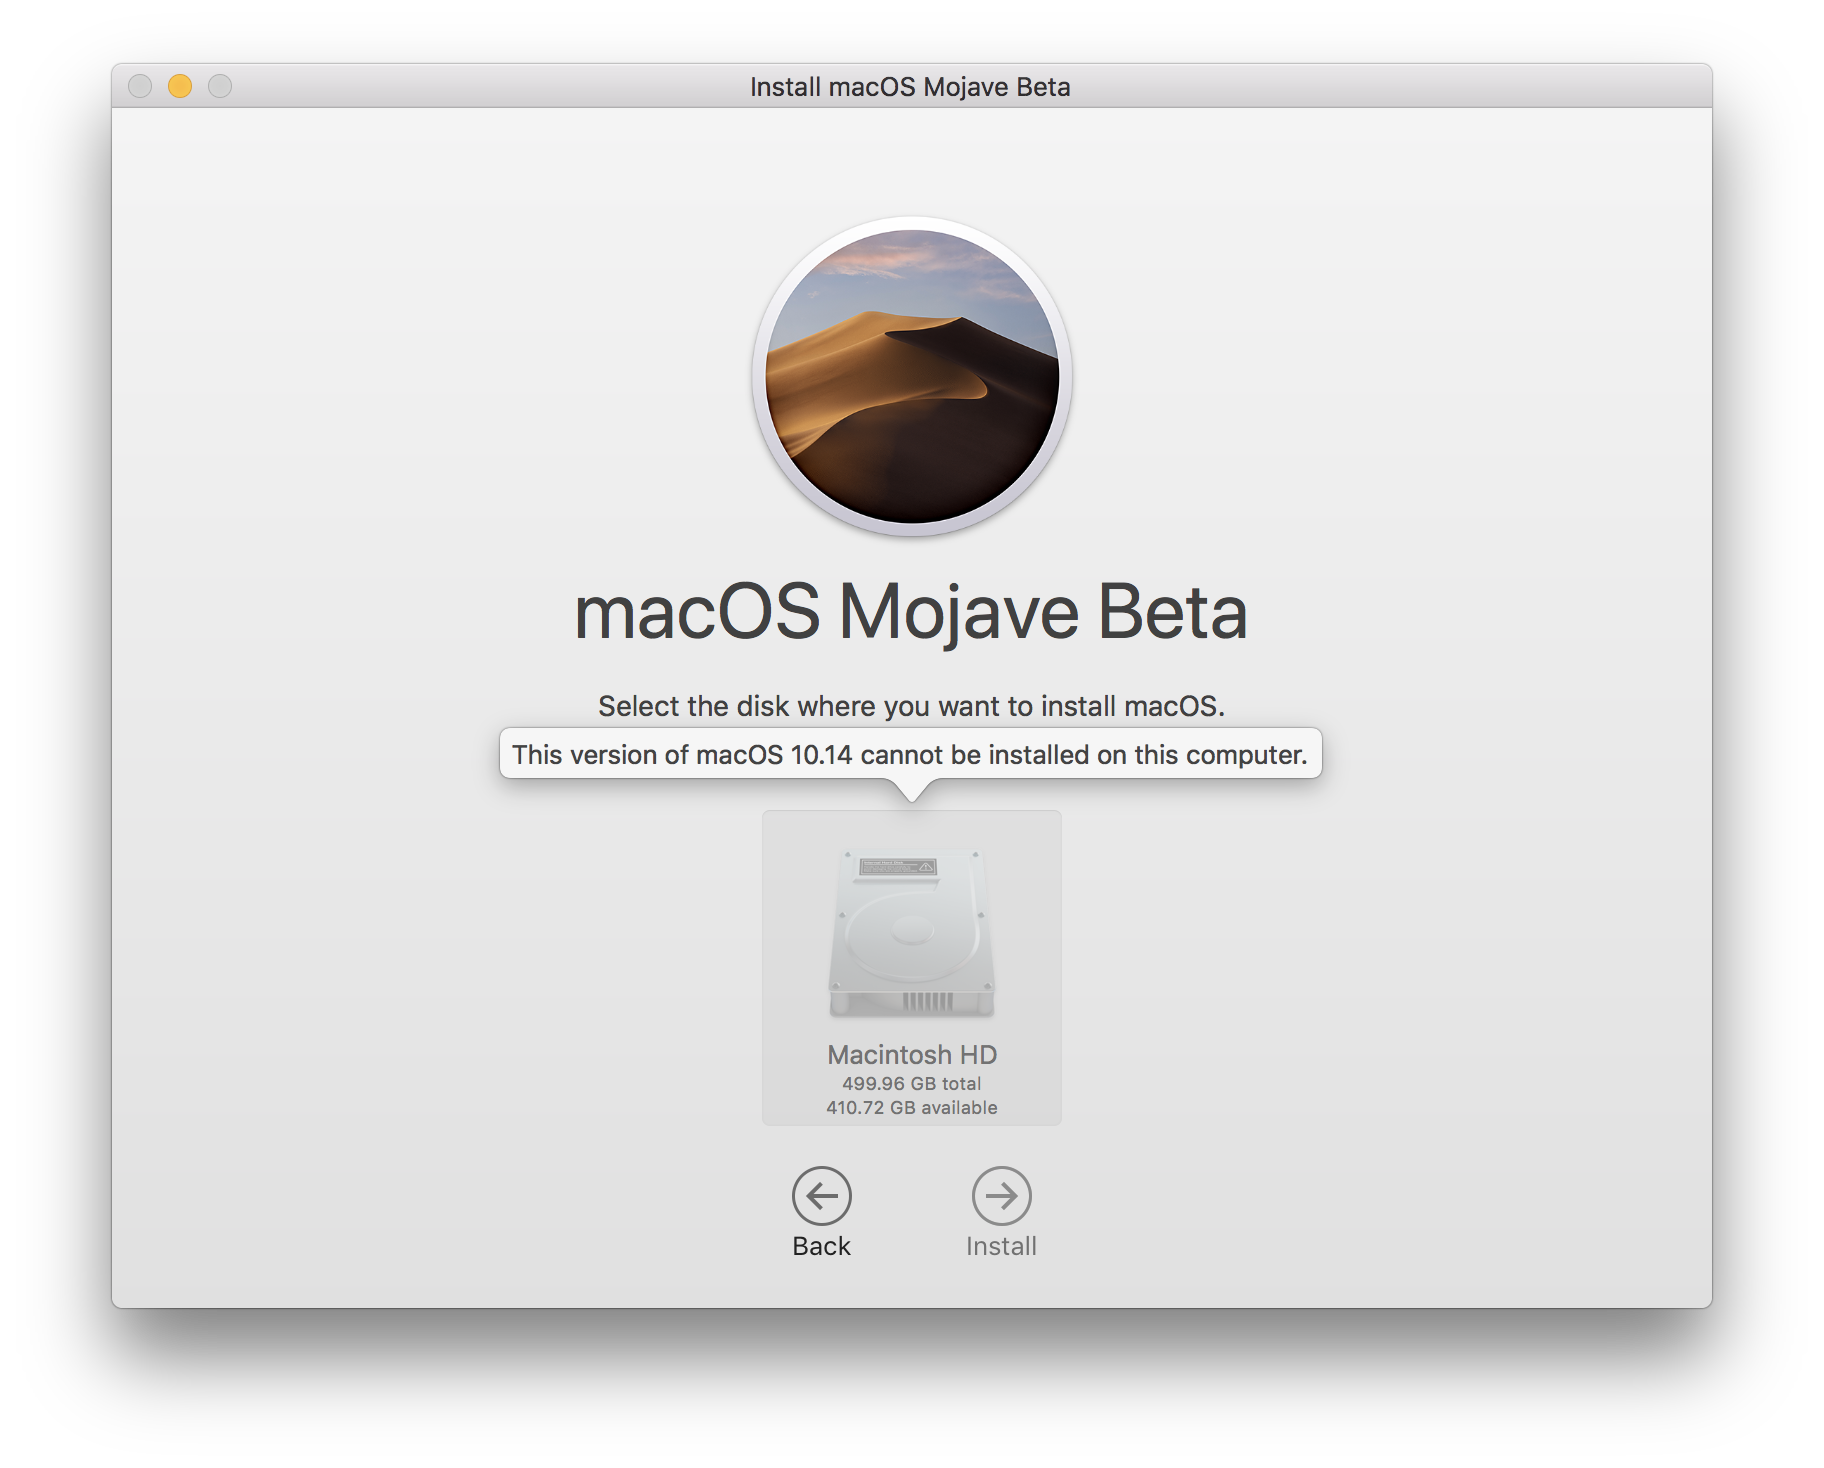 2011 office for mac, backing up program files to load after install of new os